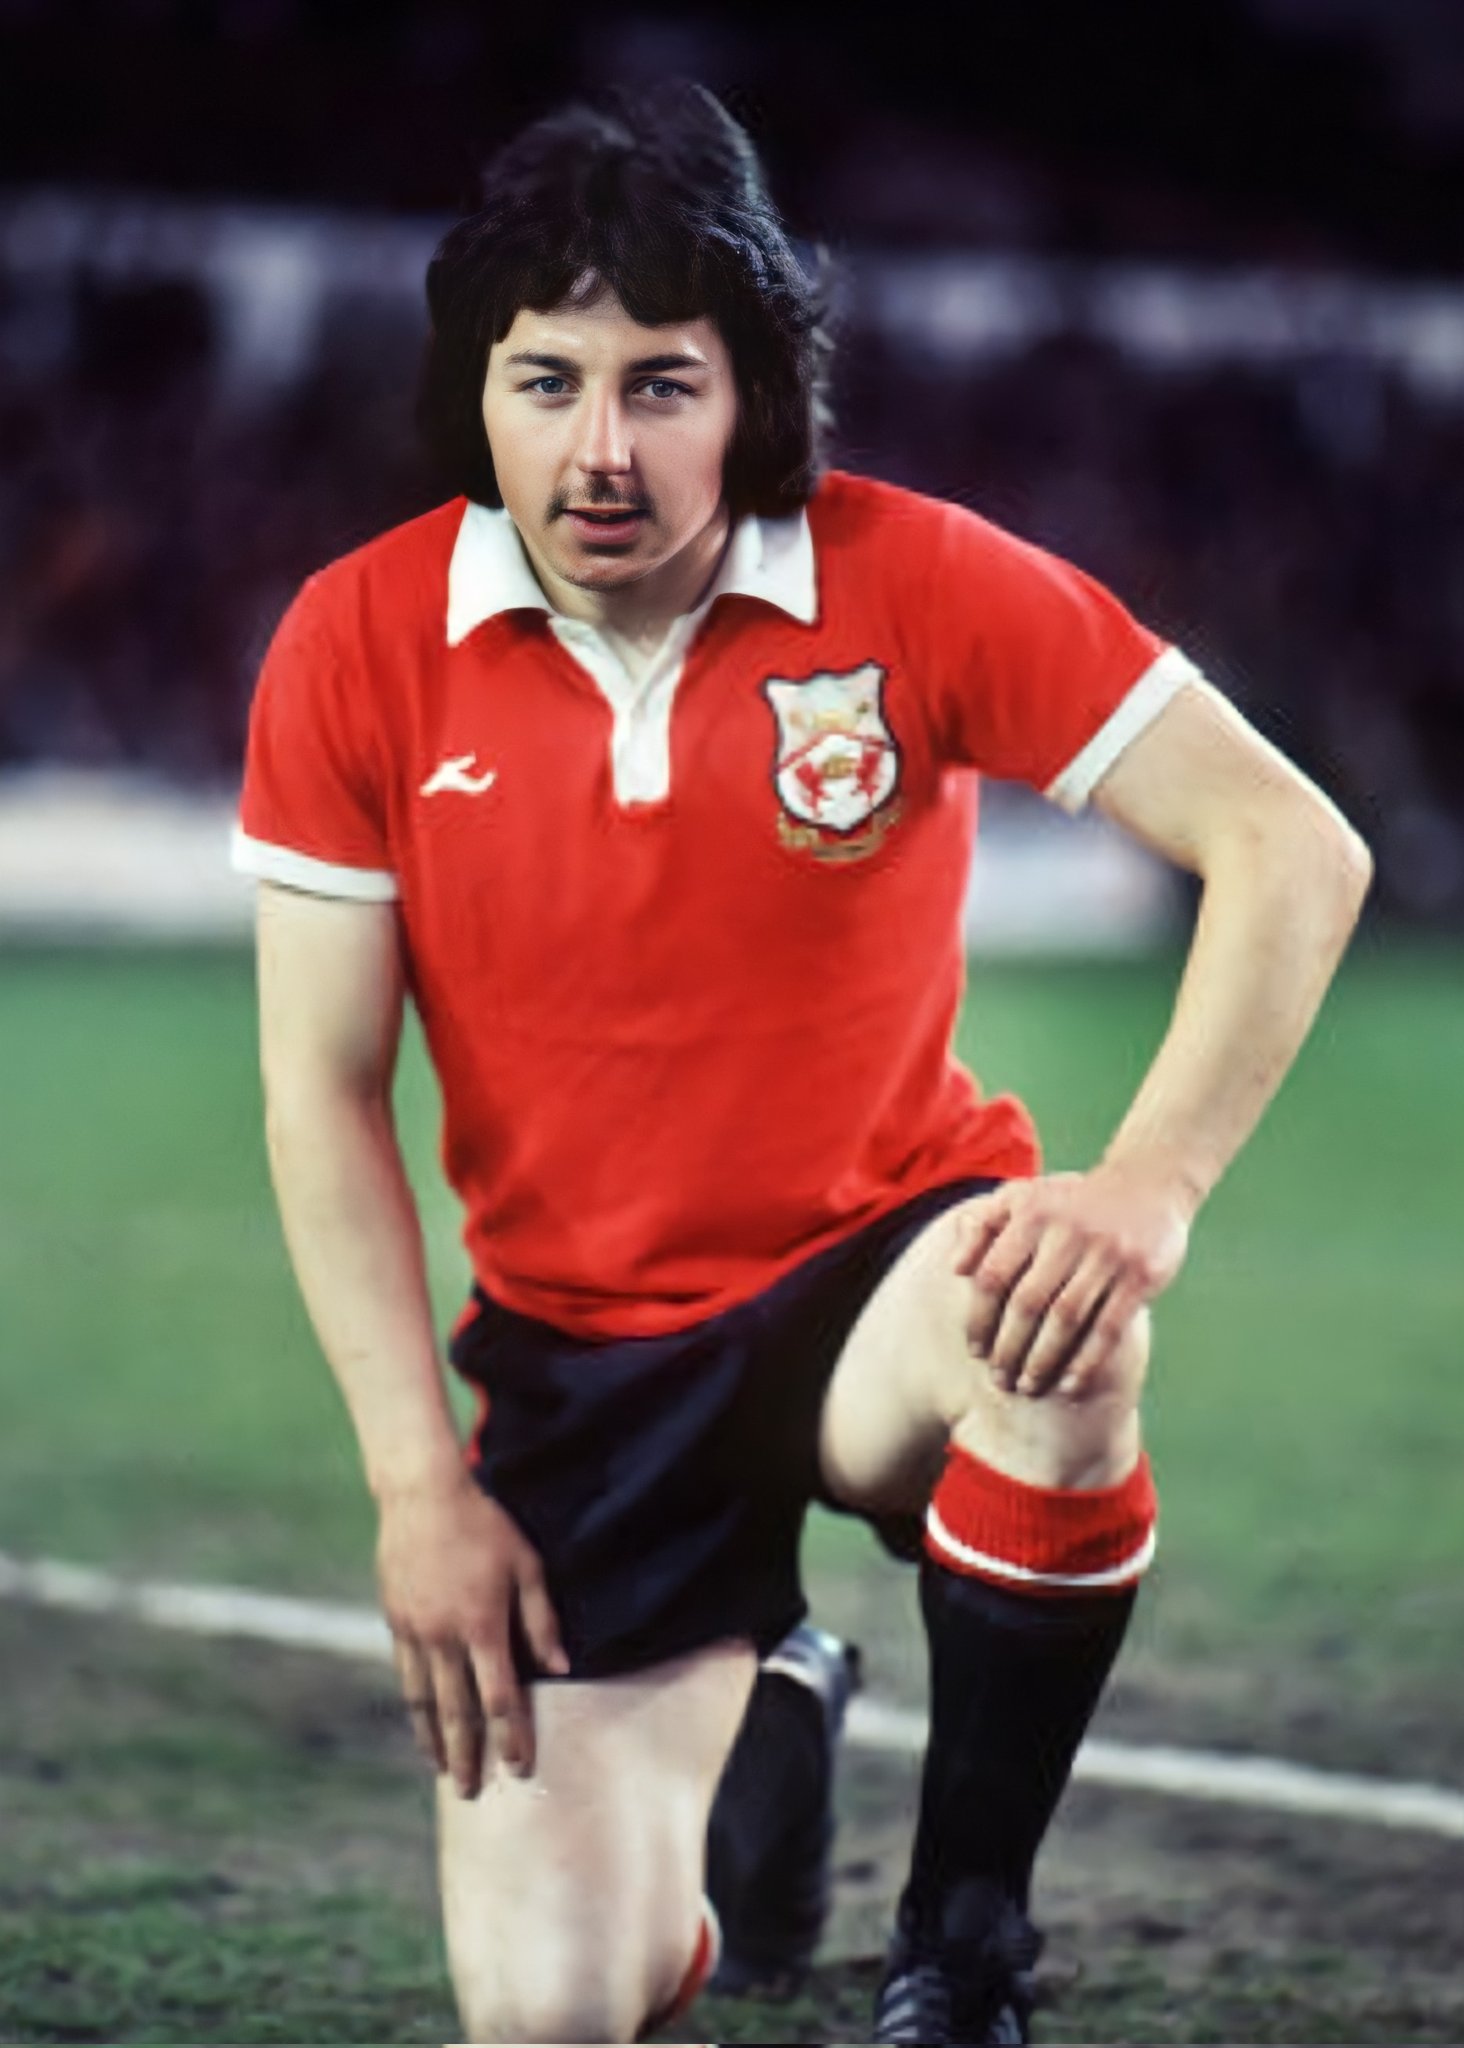 Football Past on X: "Mickey Thomas (76/77 season) #WxmAFC 📸 Colorsport https://t.co/Dy74uoEy2T" / X